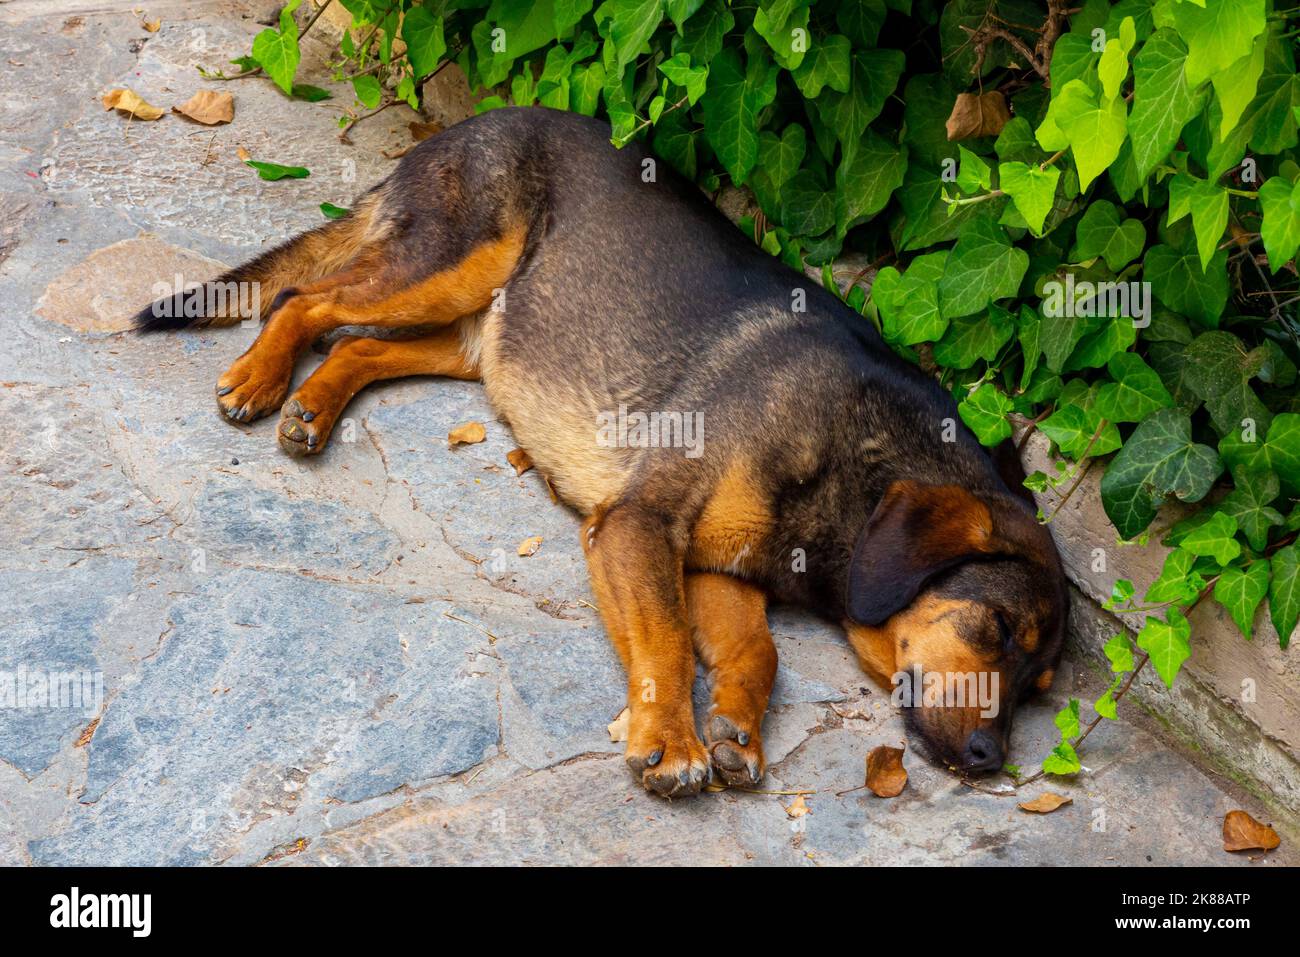 Large dog lying down asleep on a pavement next to a hedge with green leaves. Stock Photo